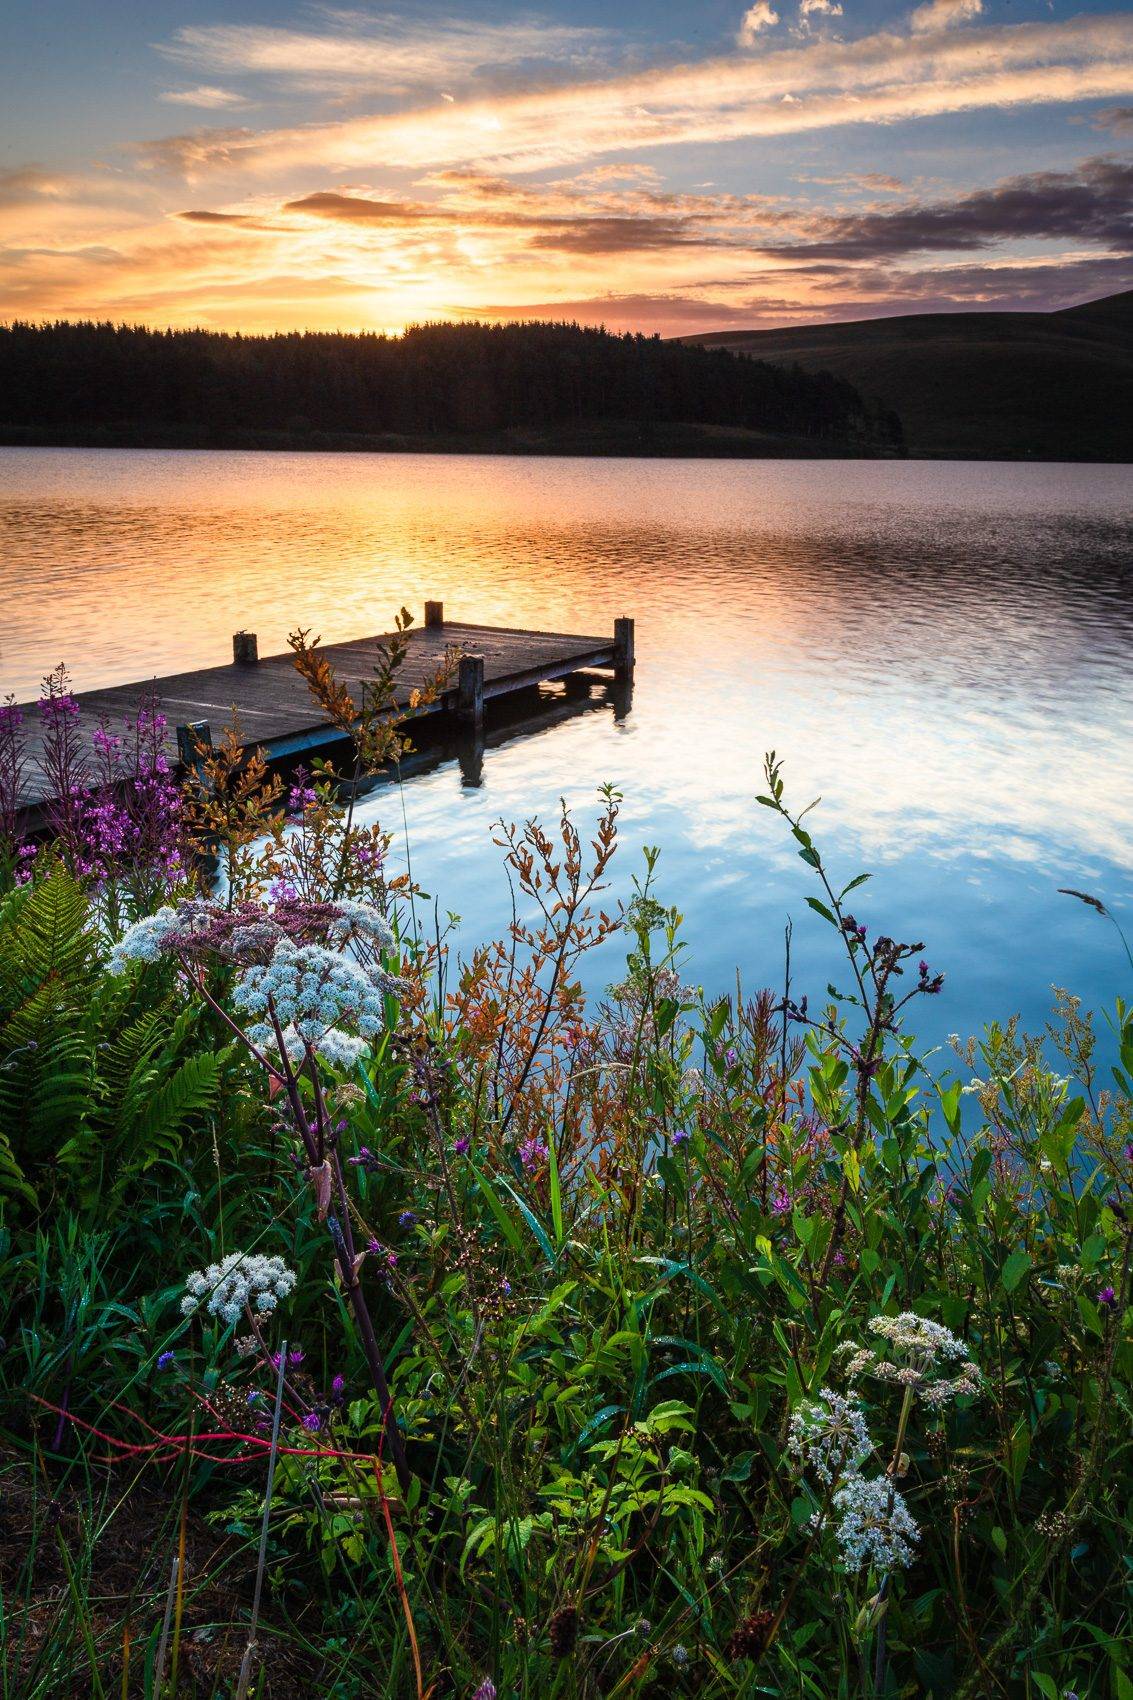 Wildflowers and jetty at Portmore Loch, Borders, Scotland.